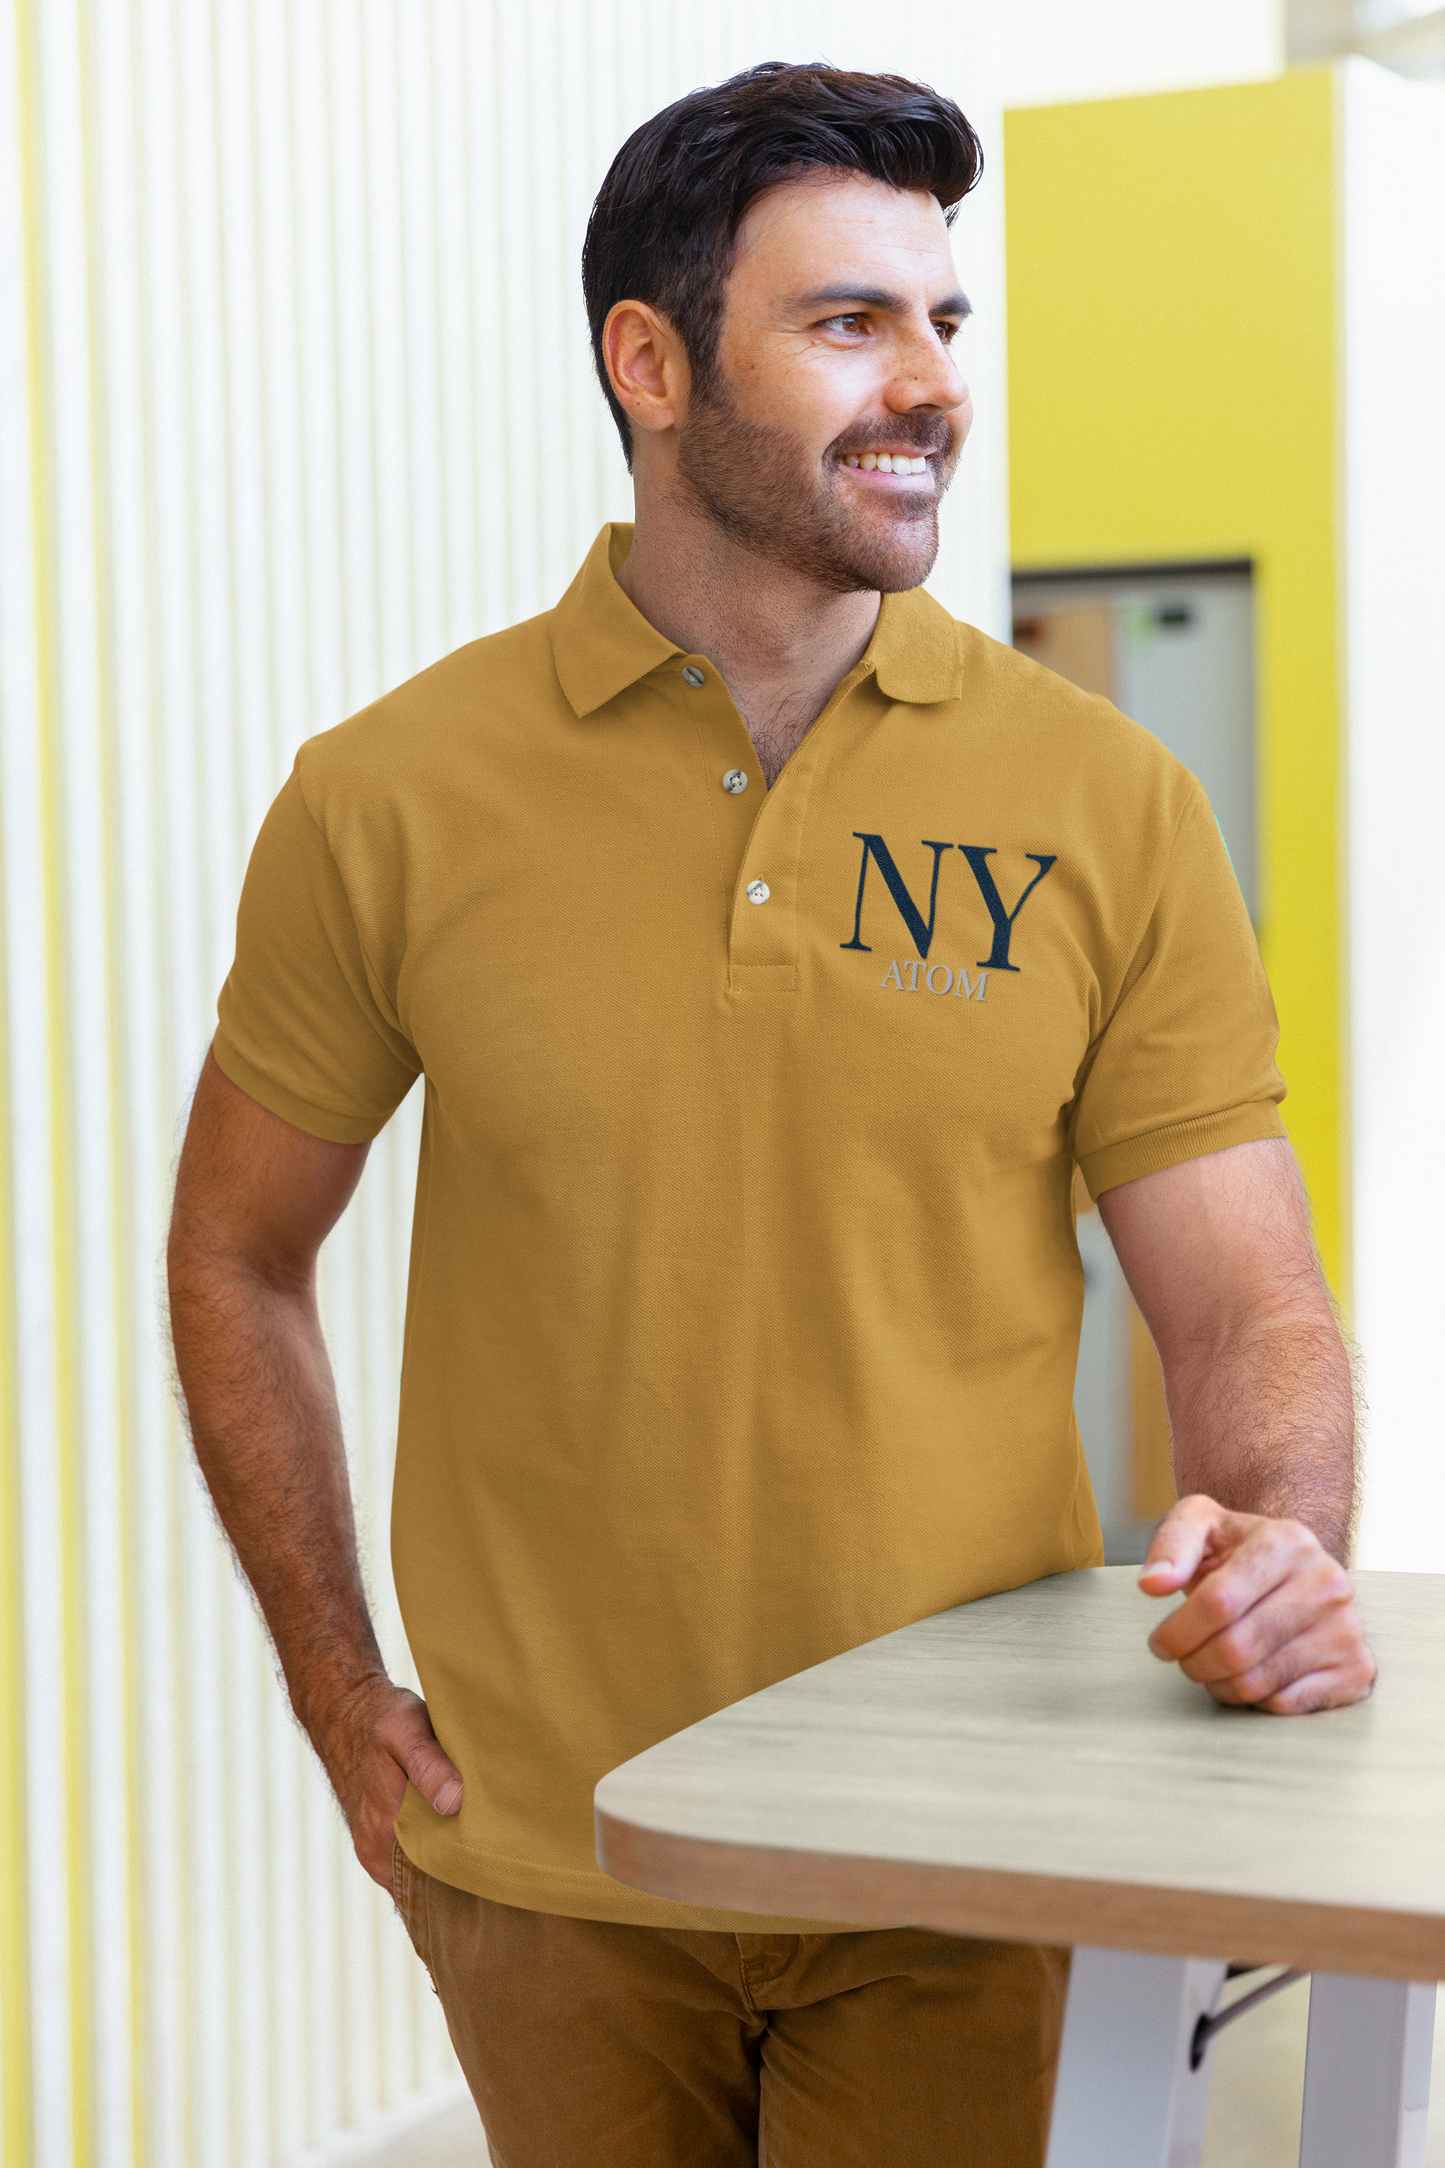 NY ATOM Embroidered Mustard Yellow Polo Neck T-Shirt For Men